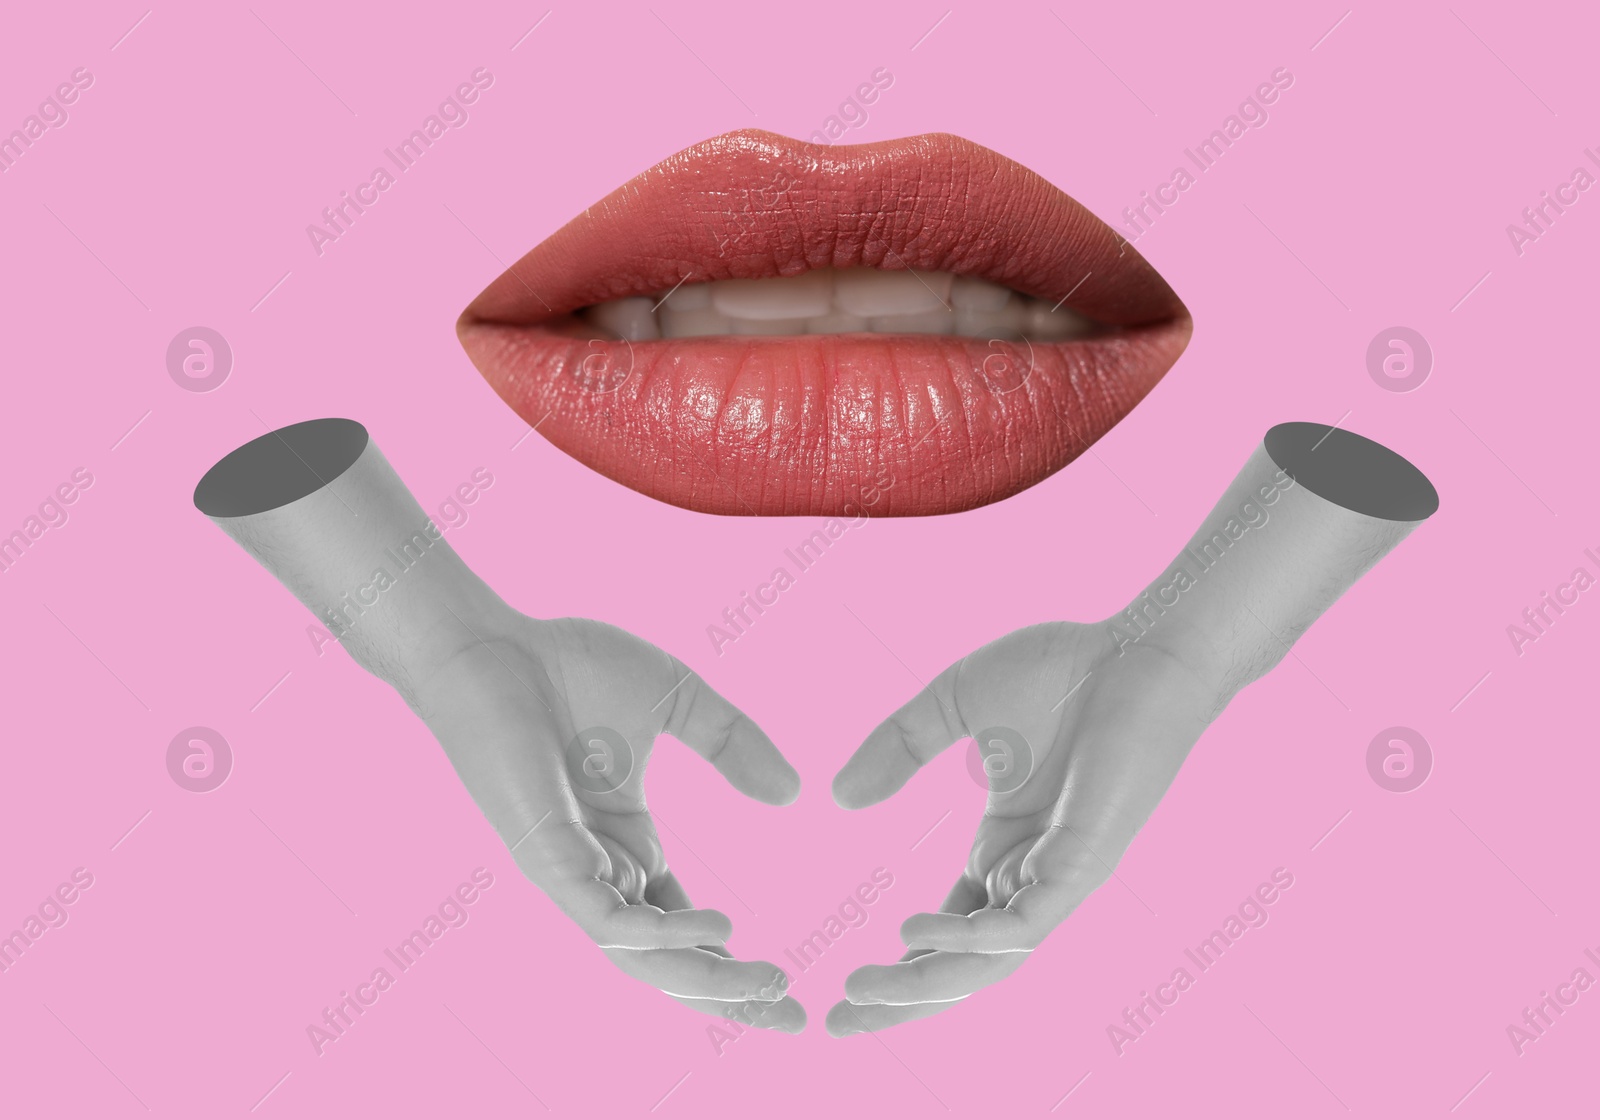 Image of Female hands making heart gesture under lips on pink background, stylish art collage